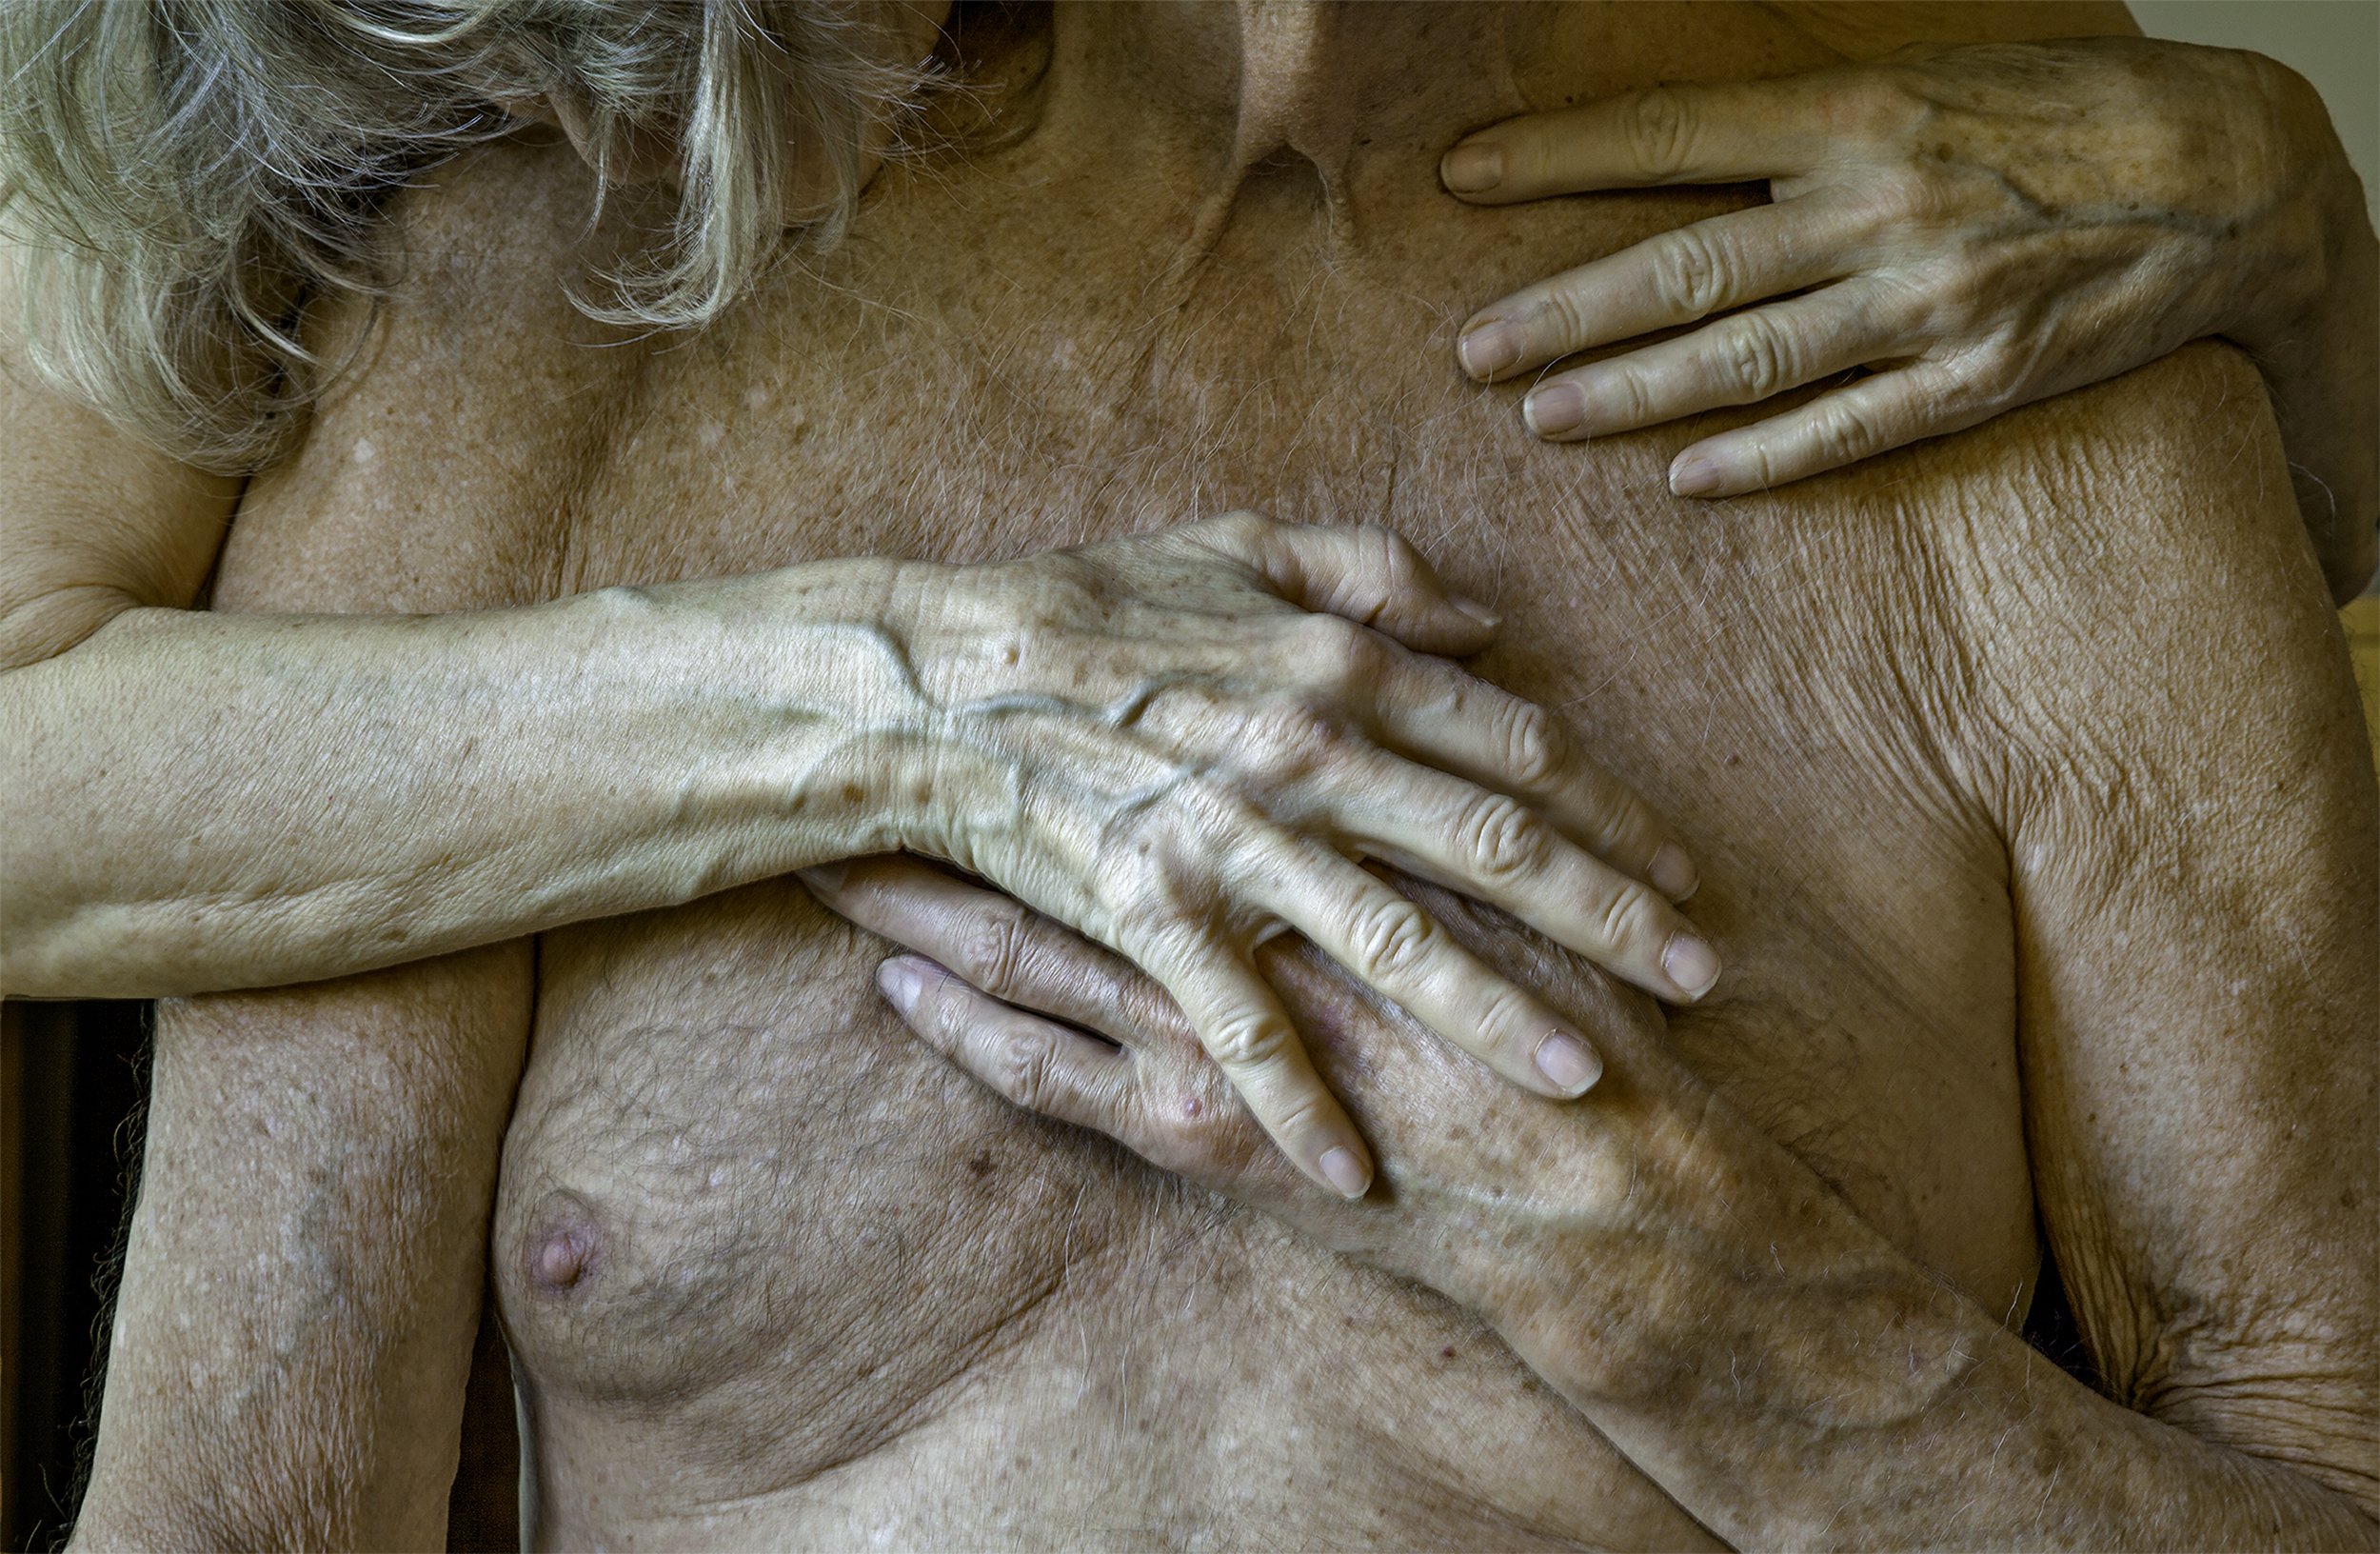  Marna Clarke,  Arms Embrace , 2010, archival digital print, courtesy and copyright of the artist. 